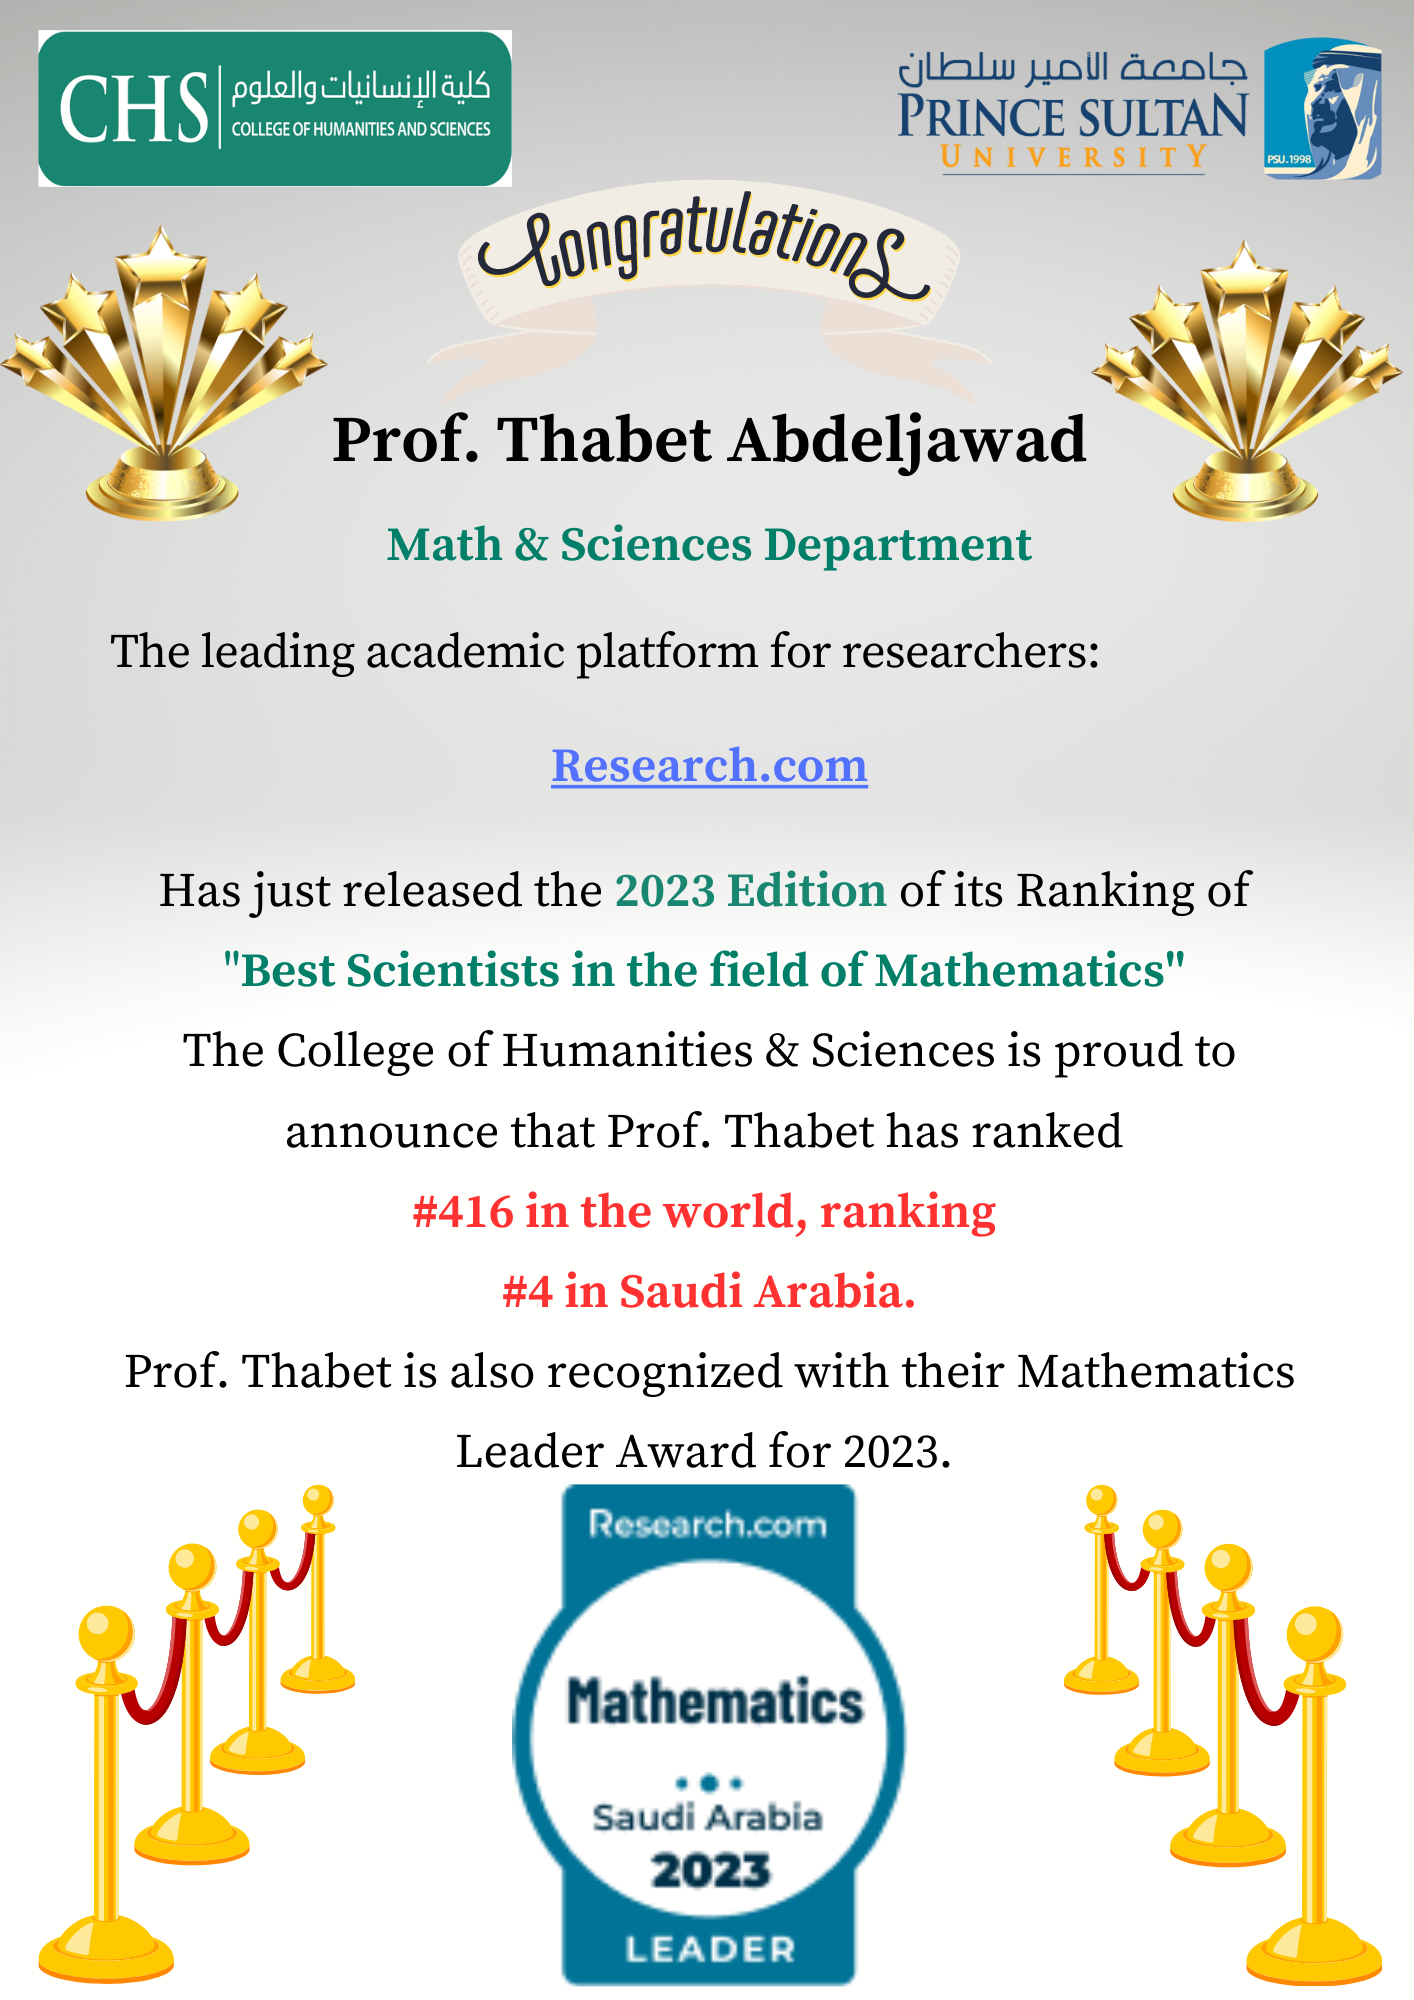 Prof. Thabet Abdeljawad is Ranked Among The Best Scientists for 2023-Congratulatory Note